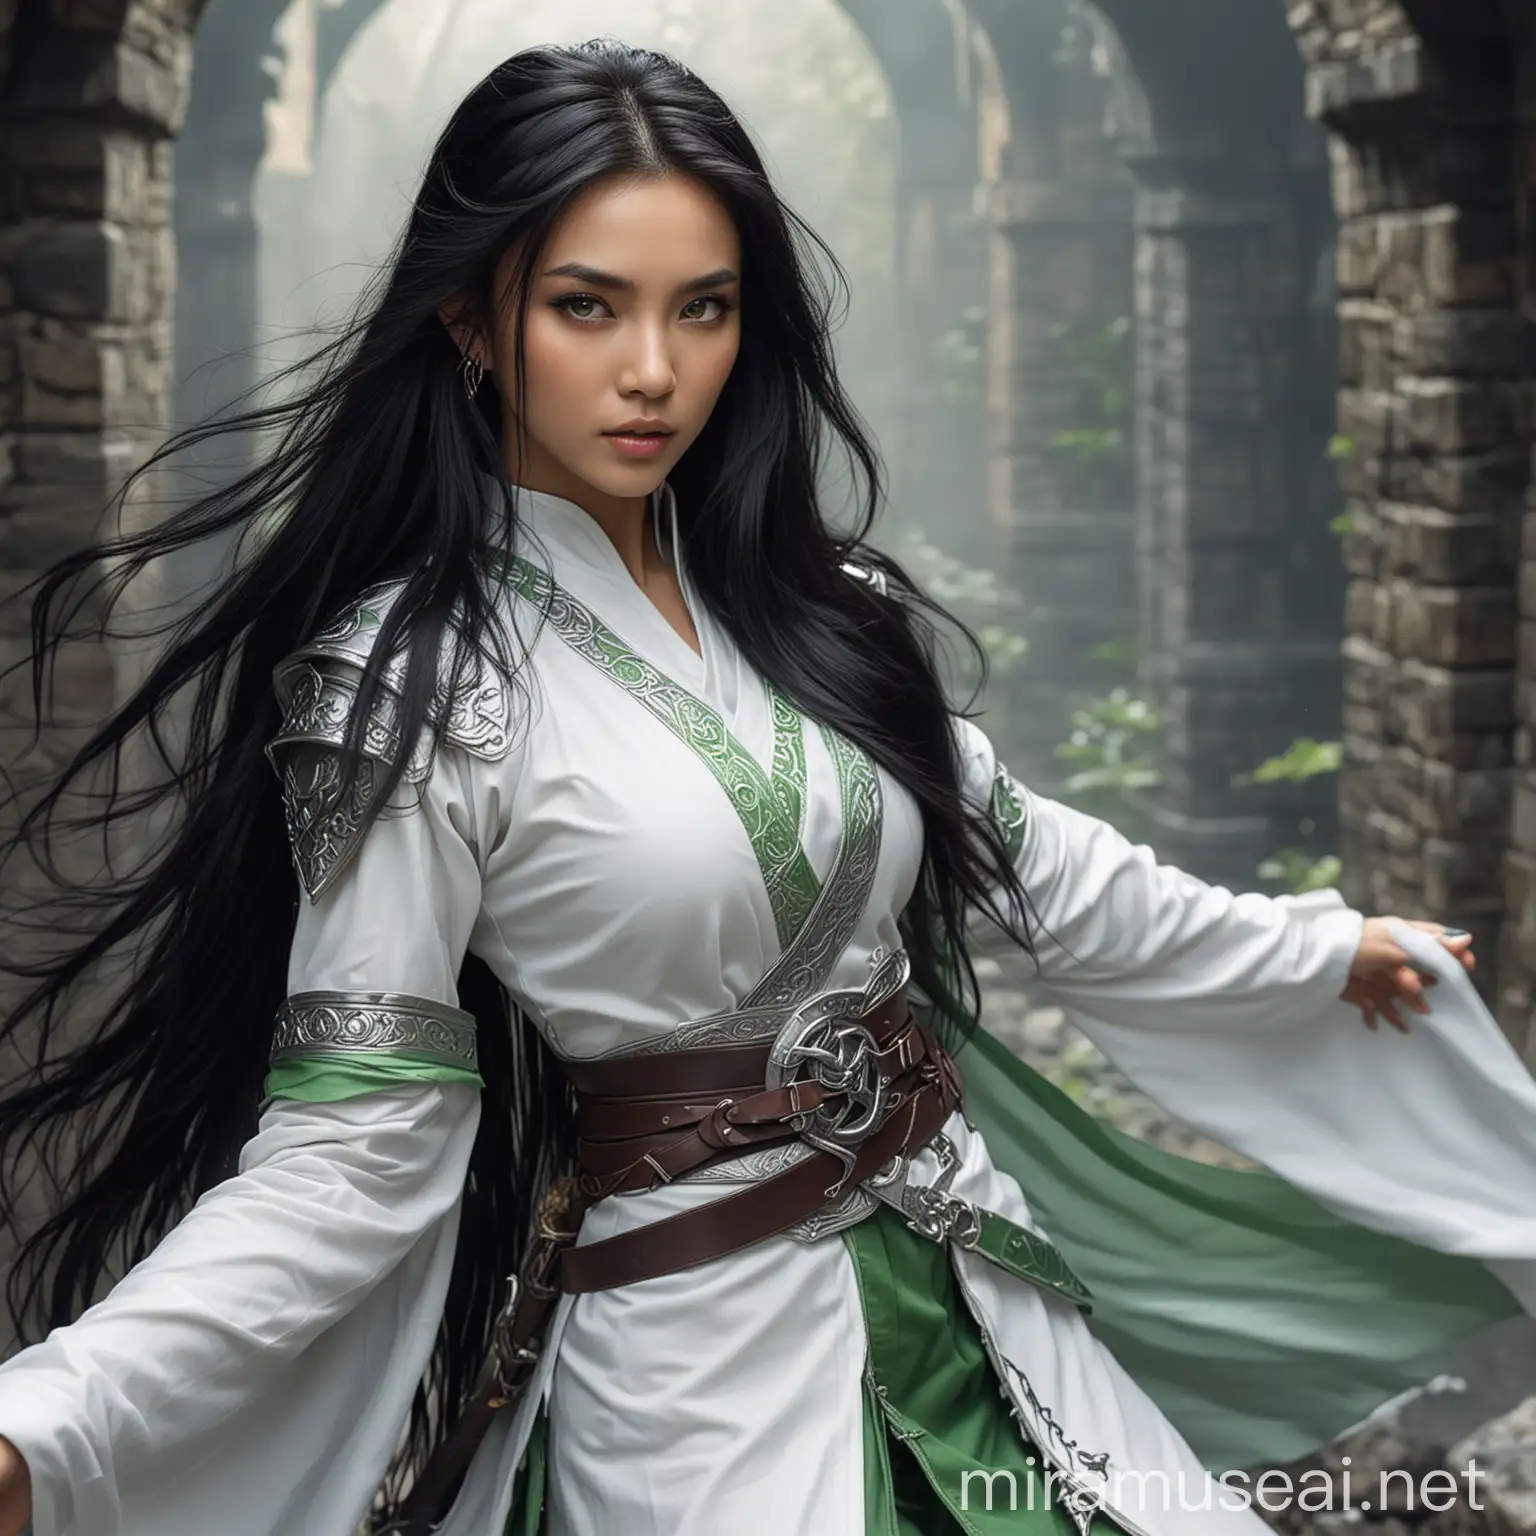 Asian Warrior Woman in Elegant Battle Attire Fantasy Dungeons and Dragons Style